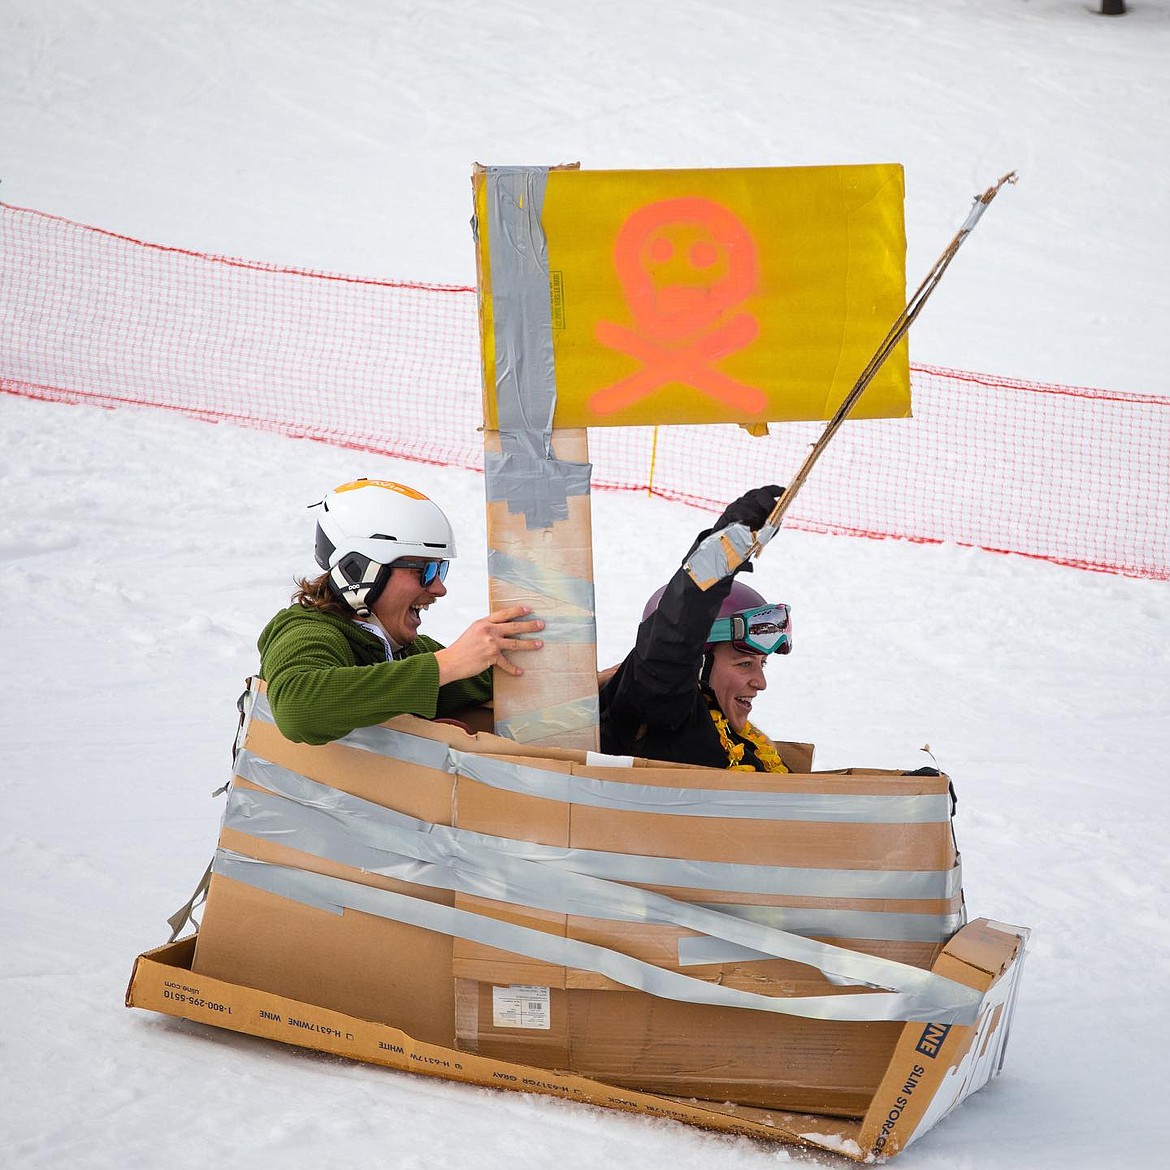 The snowy slopes of Lookout Pass provide the perfect backdrop for the cardboard box derby.